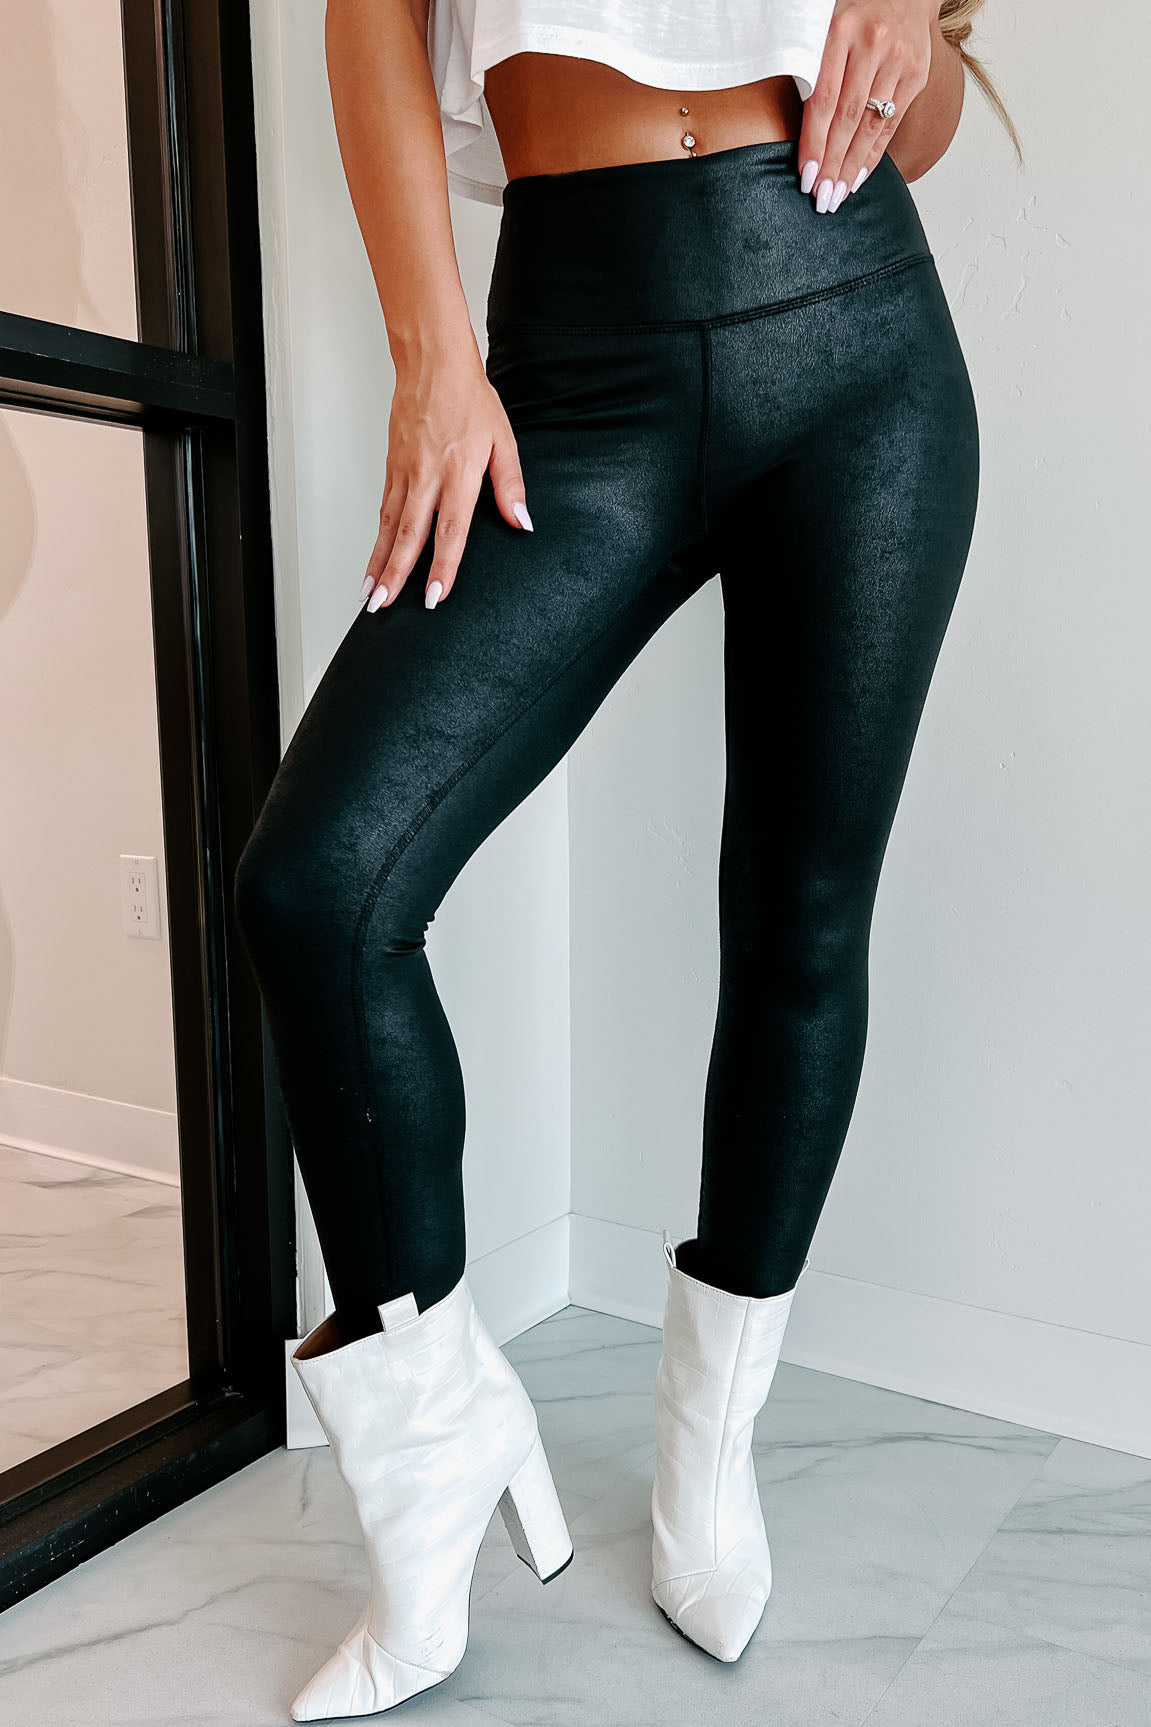 We Can Make It Work Faux Leather Legging - Black